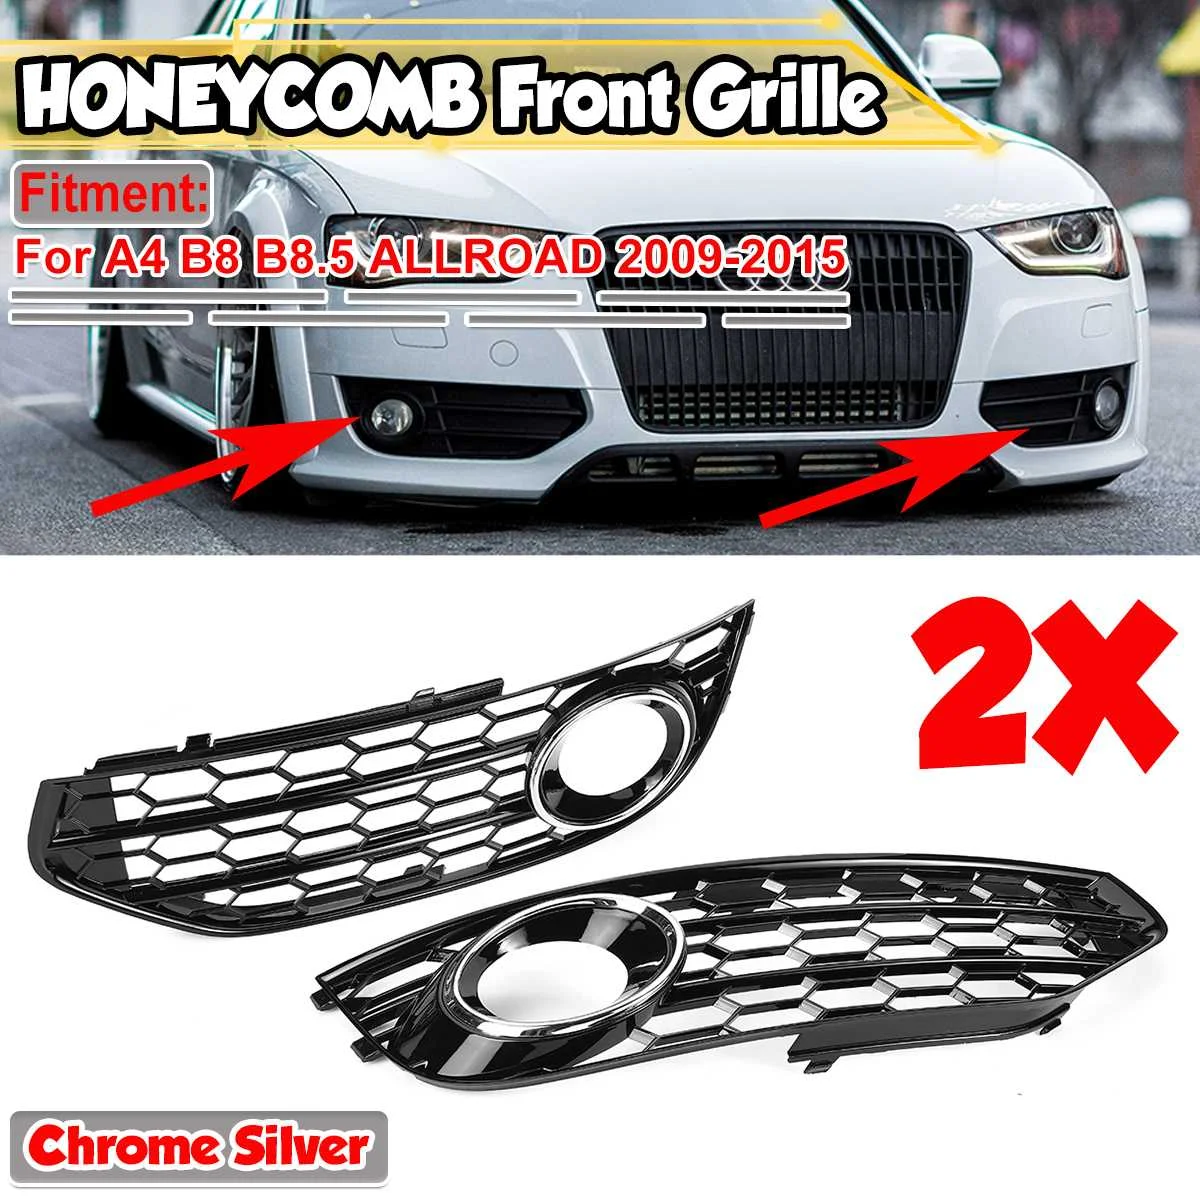 

New 2x Car Front Fog Light Grill Grille Cover Honeycomb Hex For Audi A4 B8 B8.5 ALLROAD 2009-2015 8K0807681J01C 8K0807682J01C